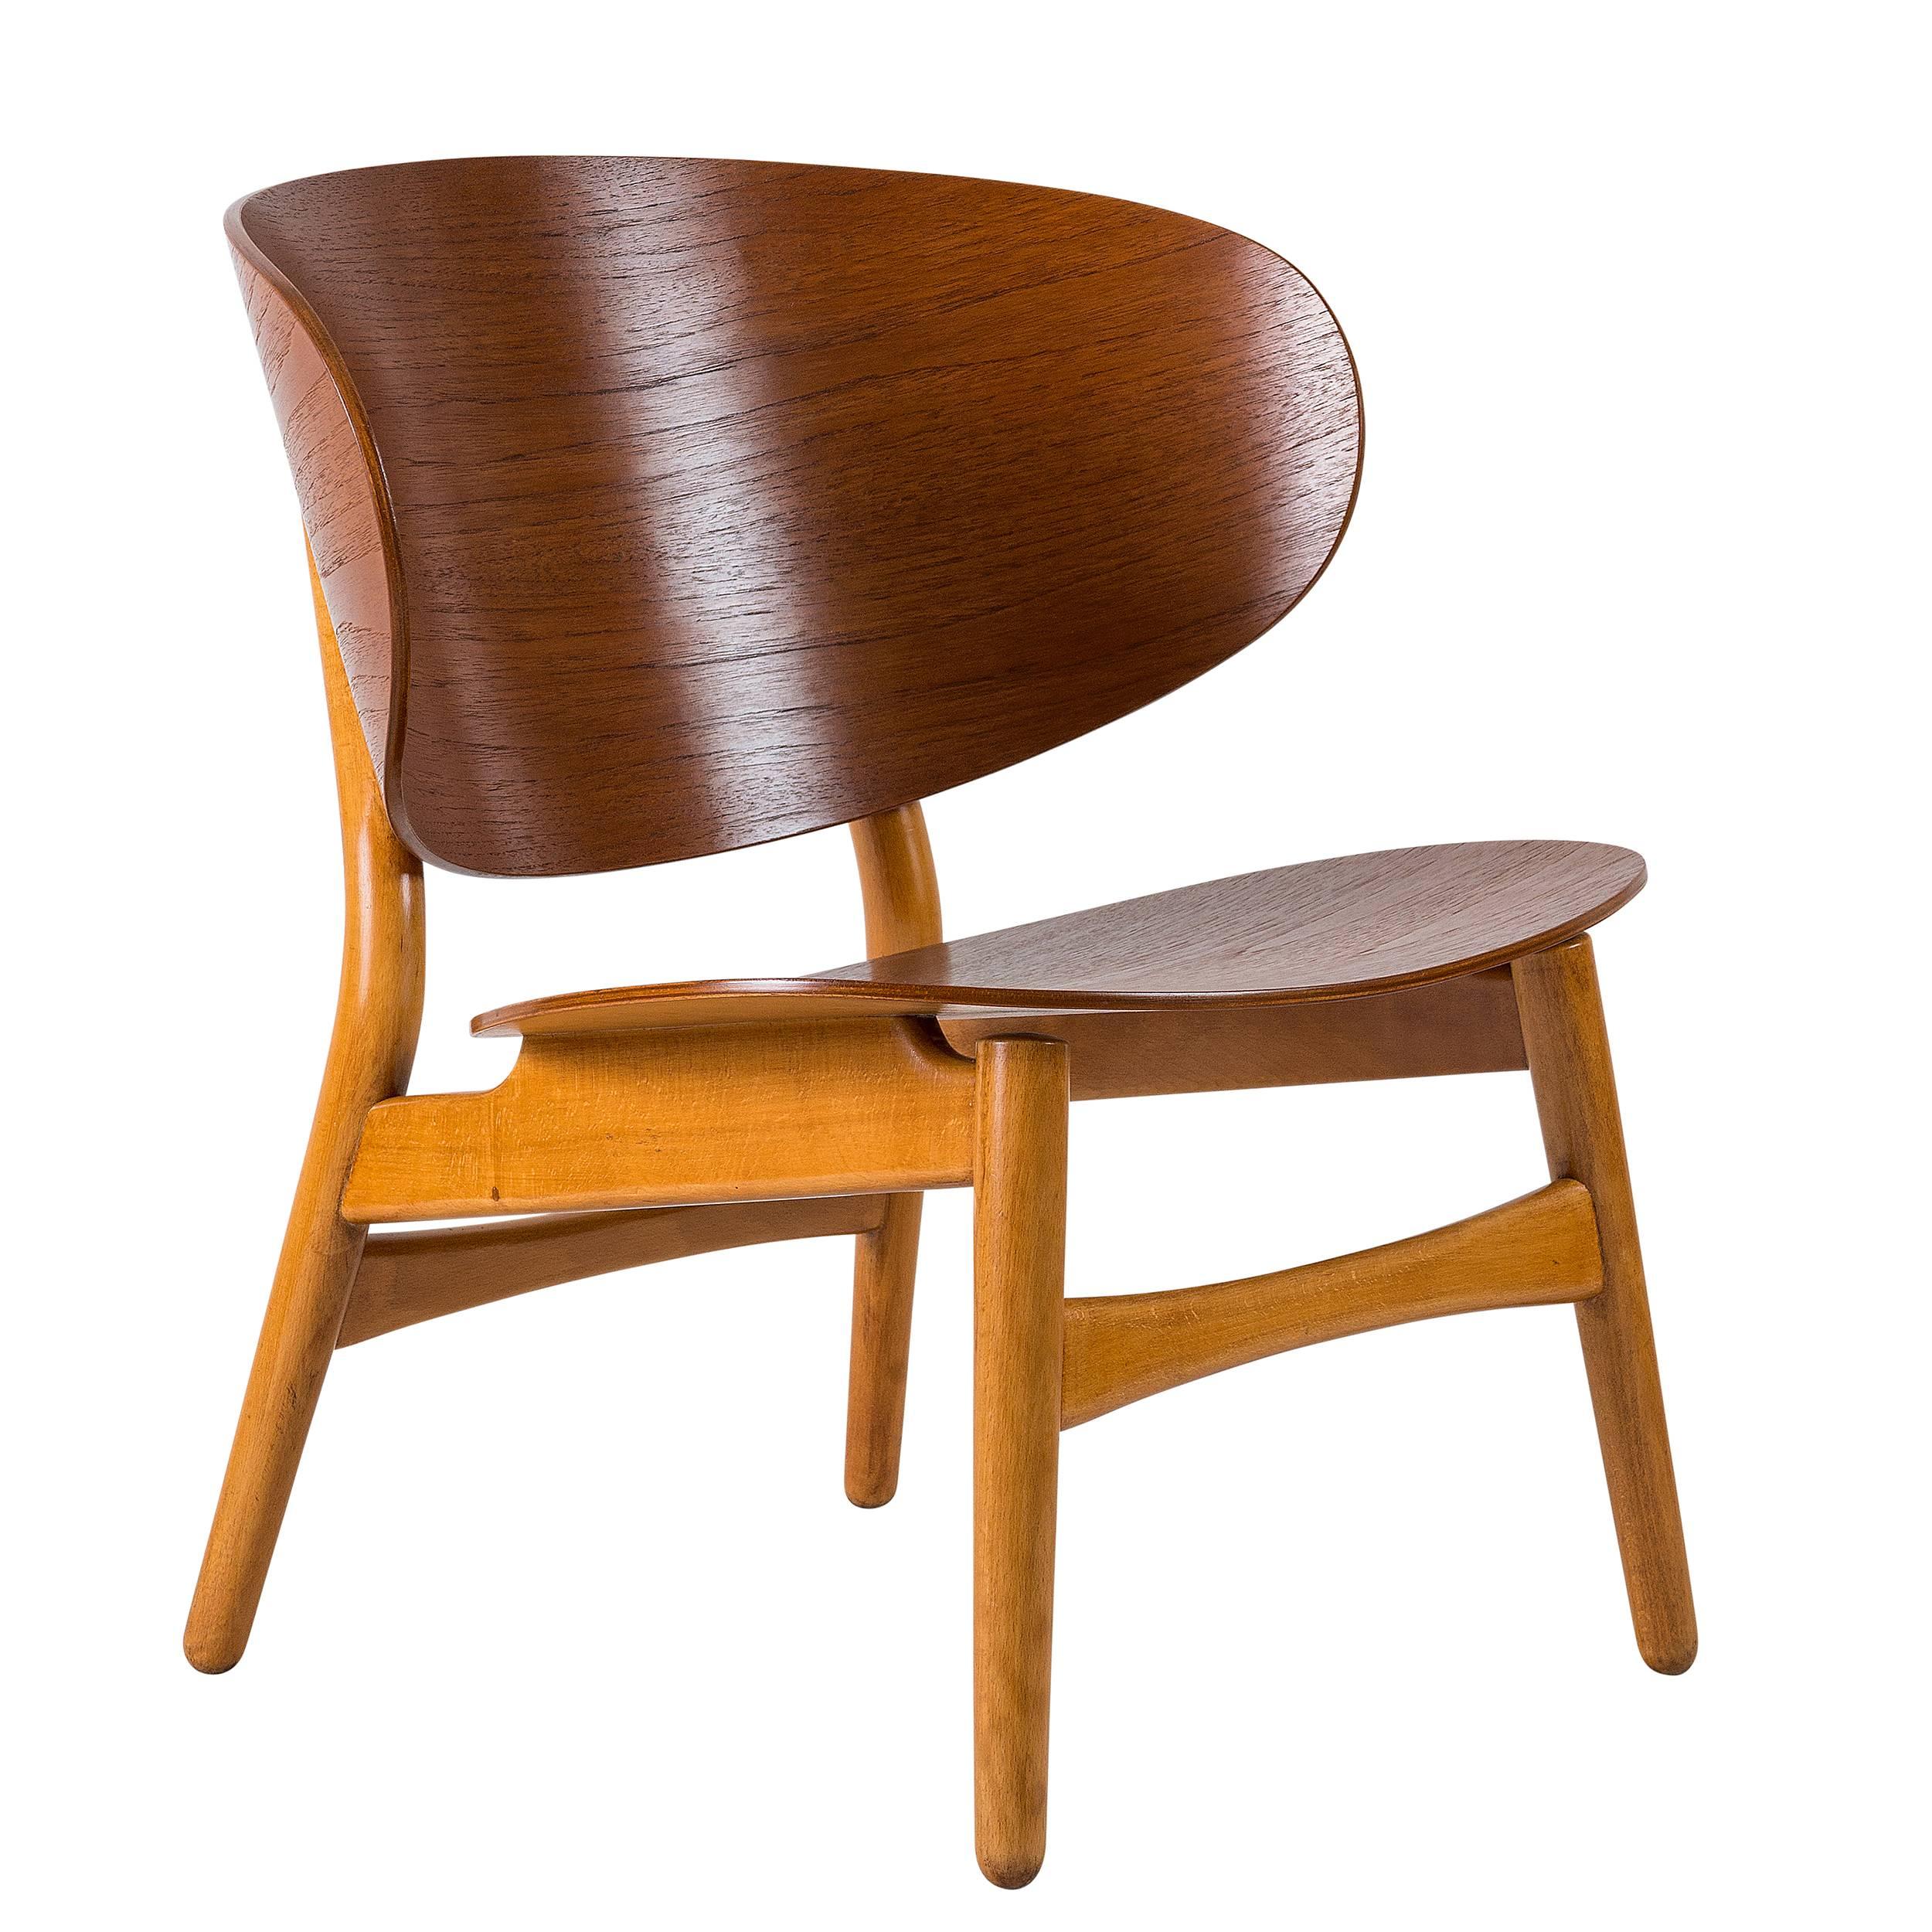 Hans Wegner "Shell" chair designed in 1948 and produced by Fritz Hansen.